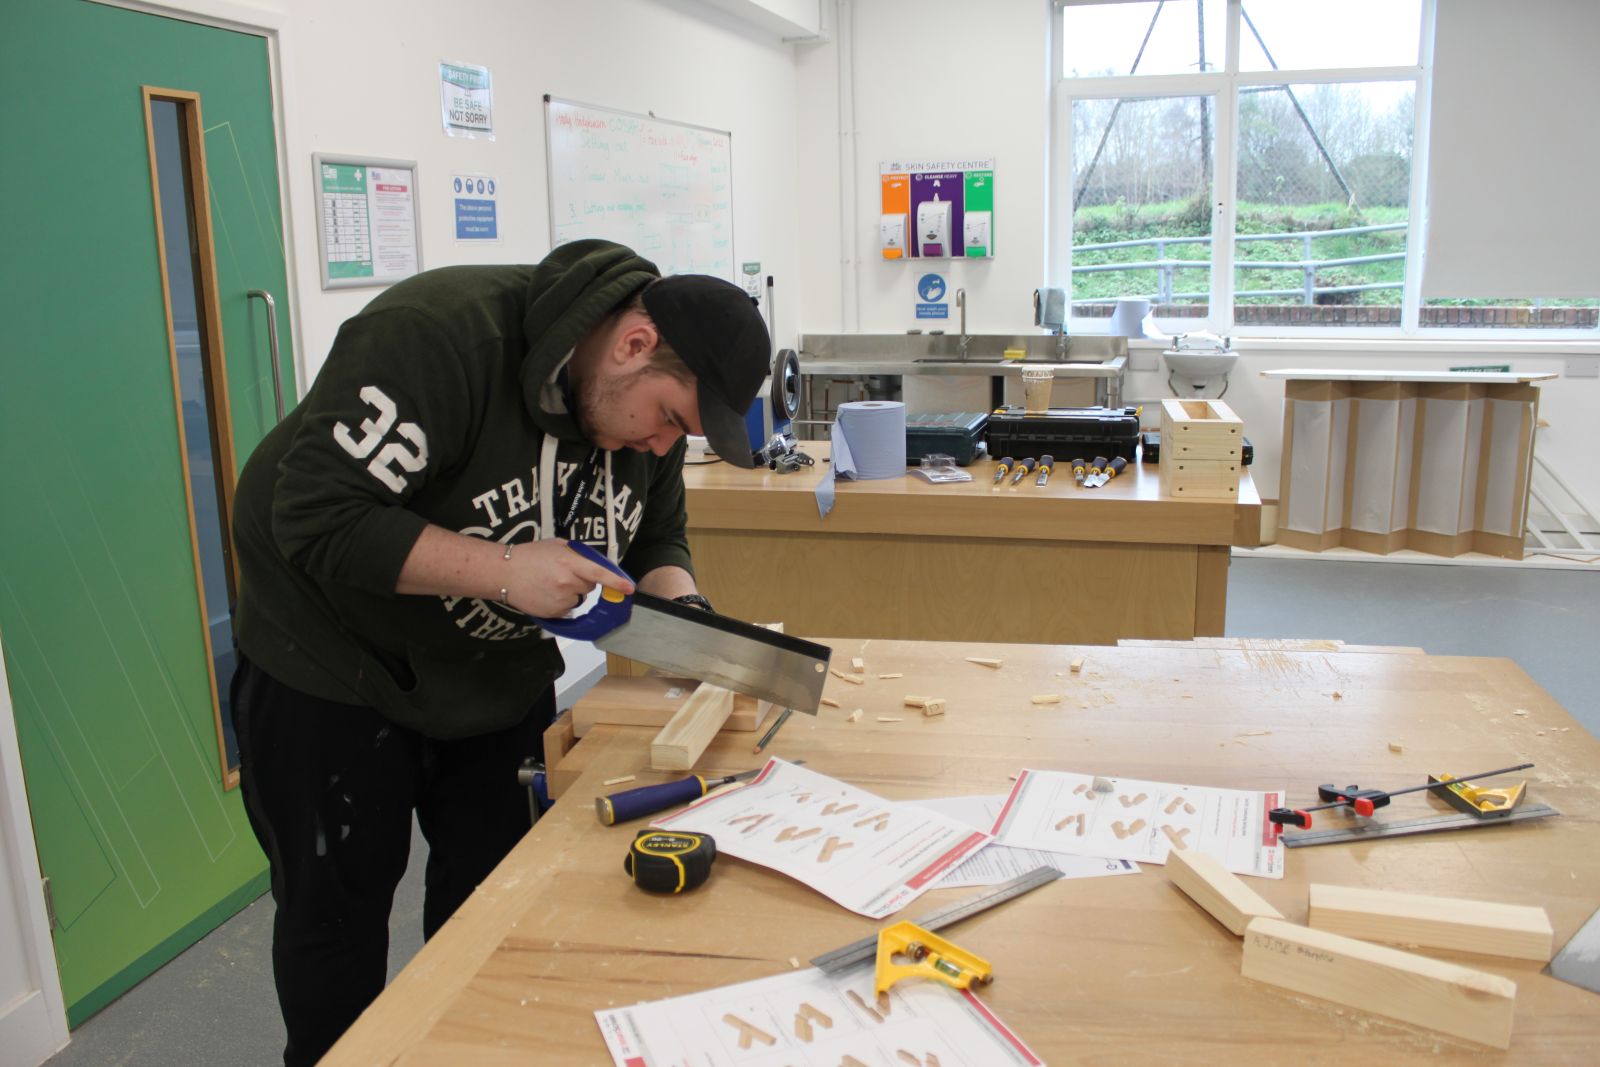 A Carpentry student at John Ruskin College